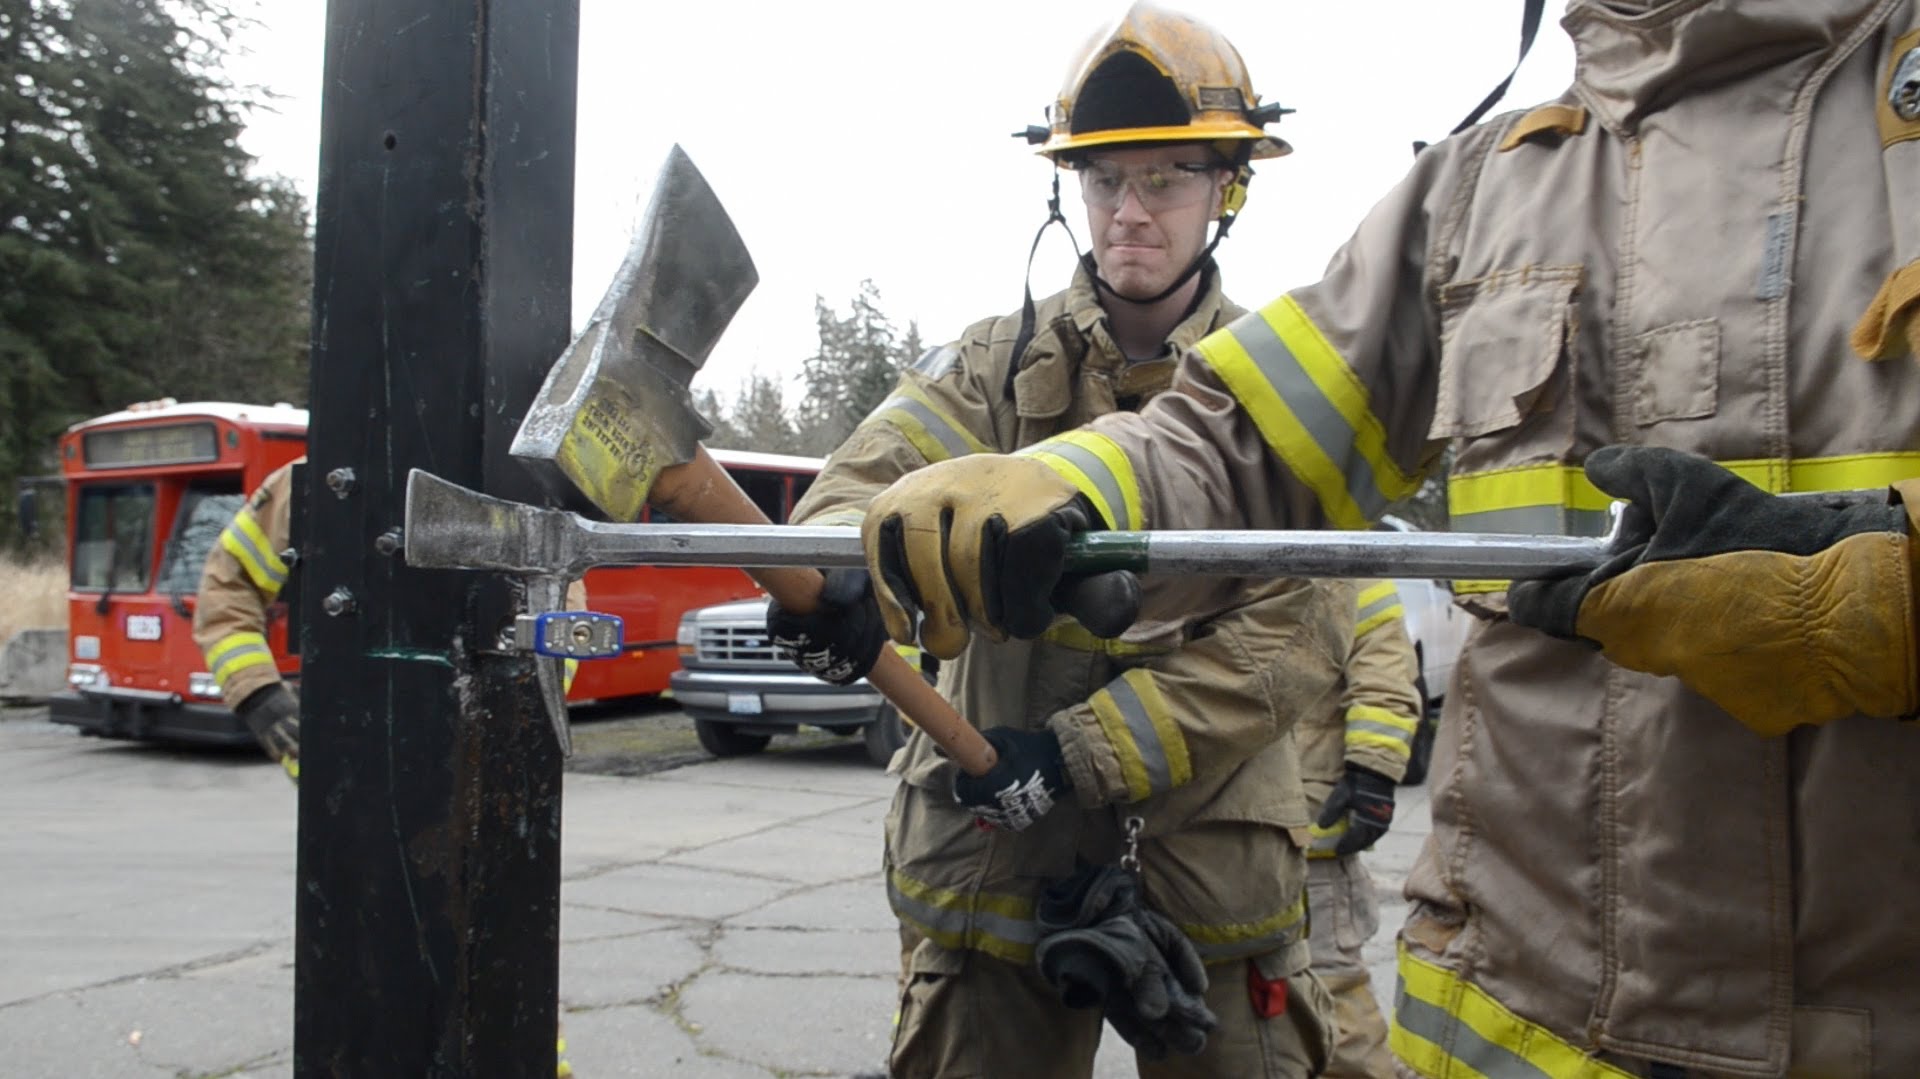 Firefighter forcible entry training - YouTube